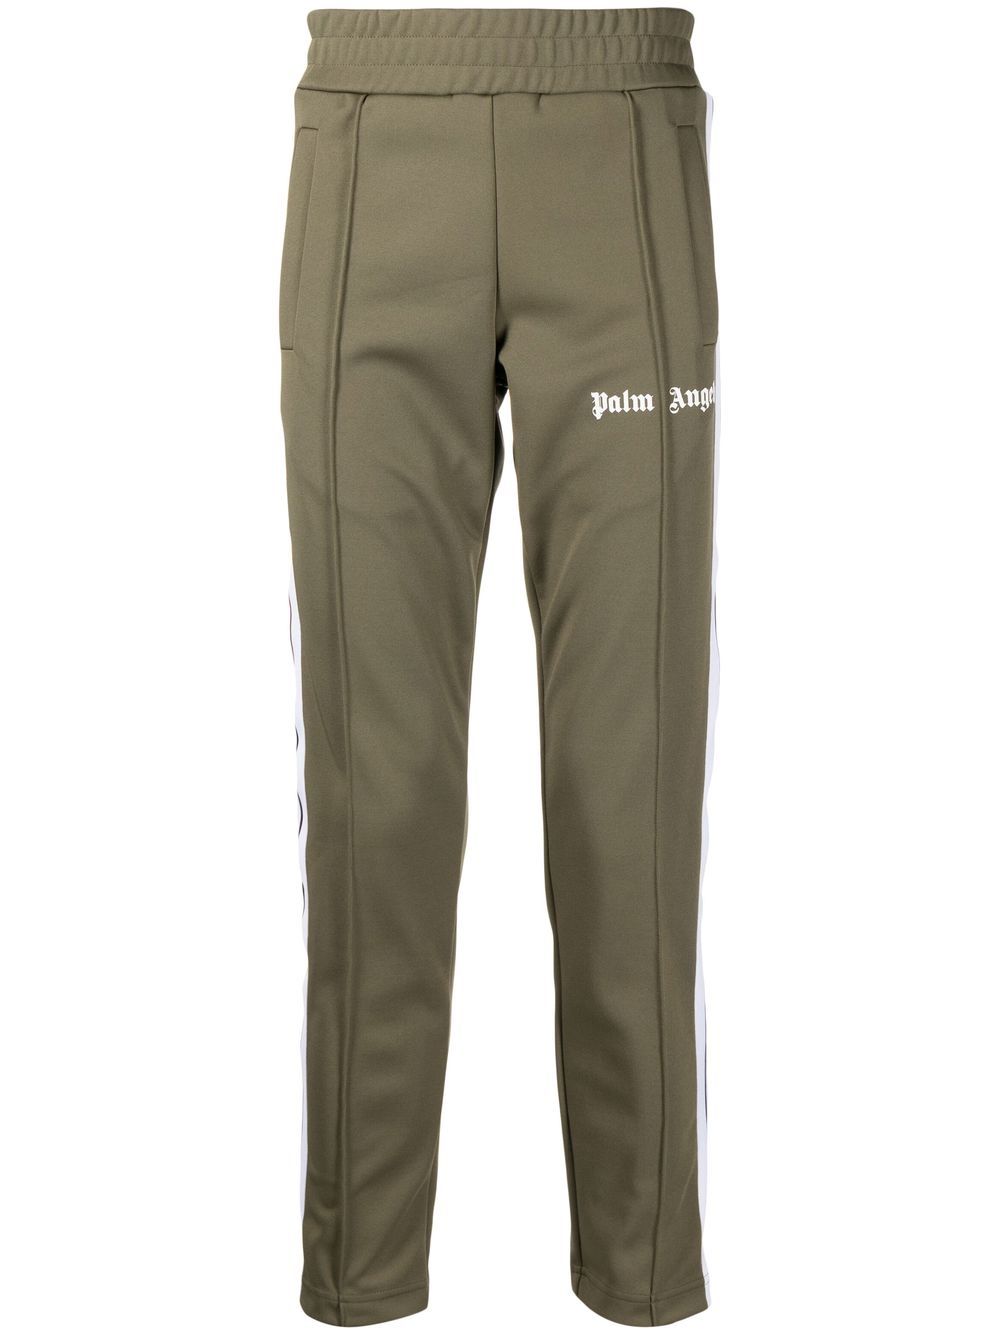 PALM ANGELS TAPERED RAISED SEAM TRACK TROUSERS